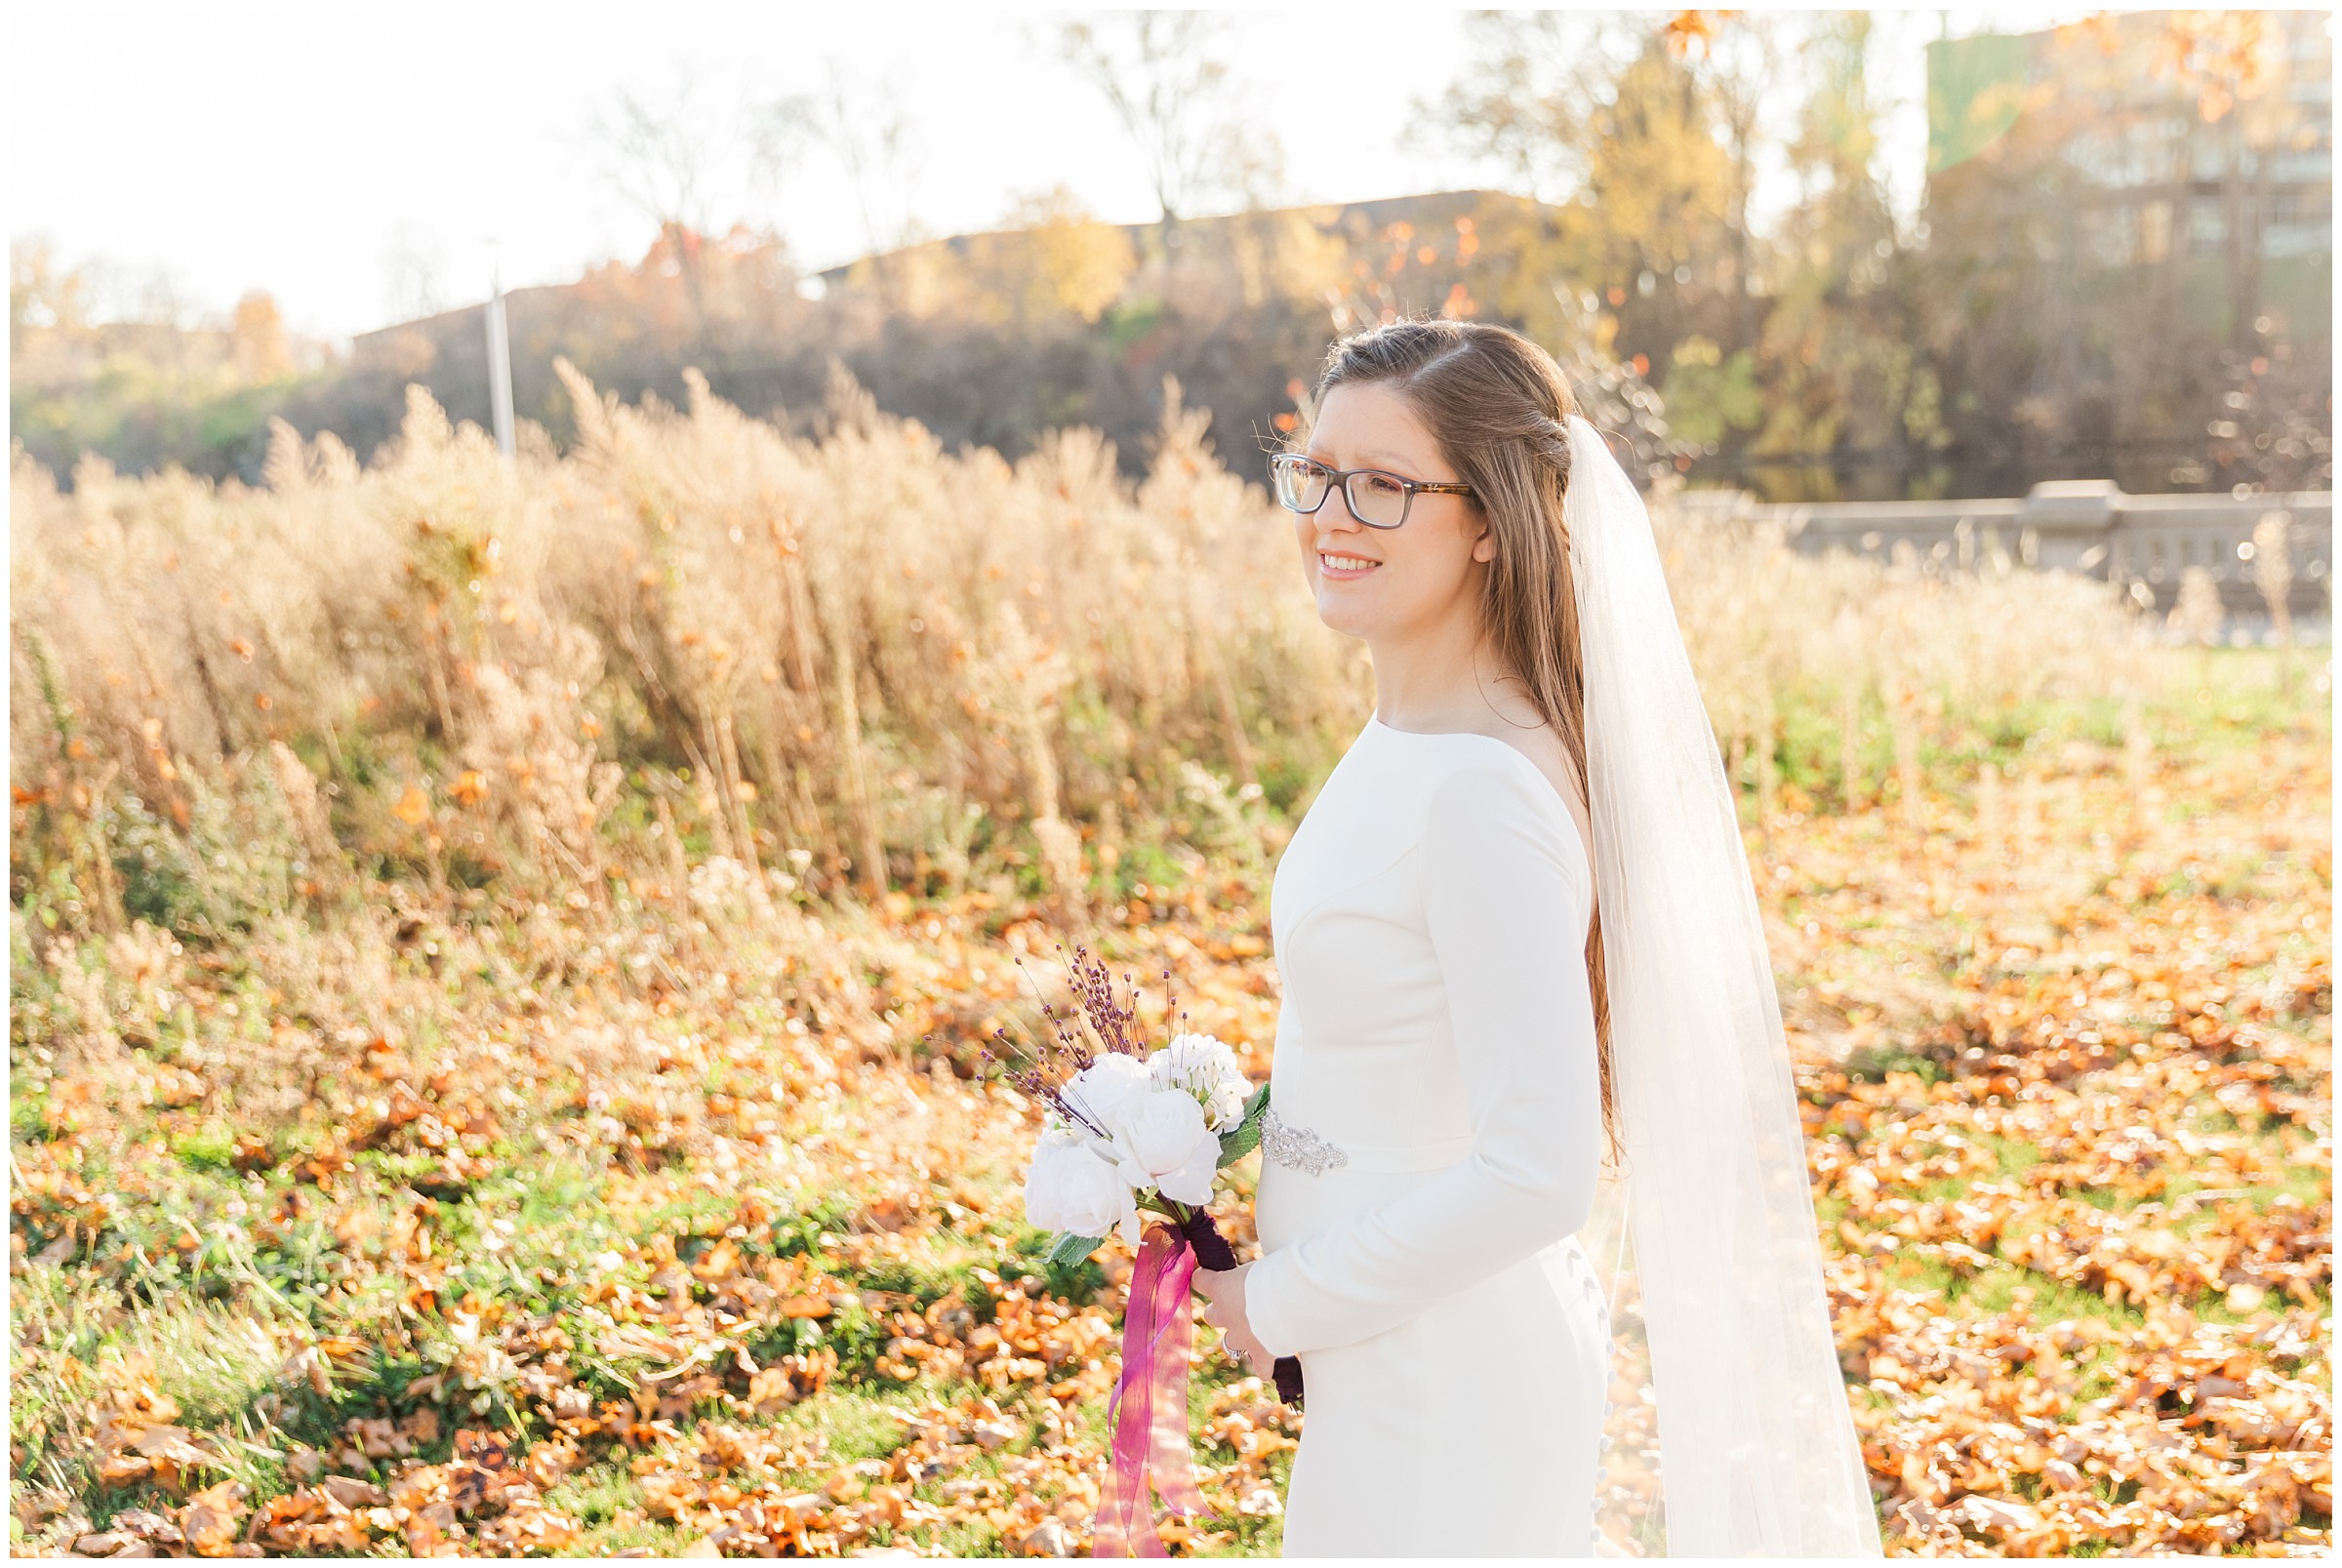 Bride smiling and holding a bouquet in a park during the fall